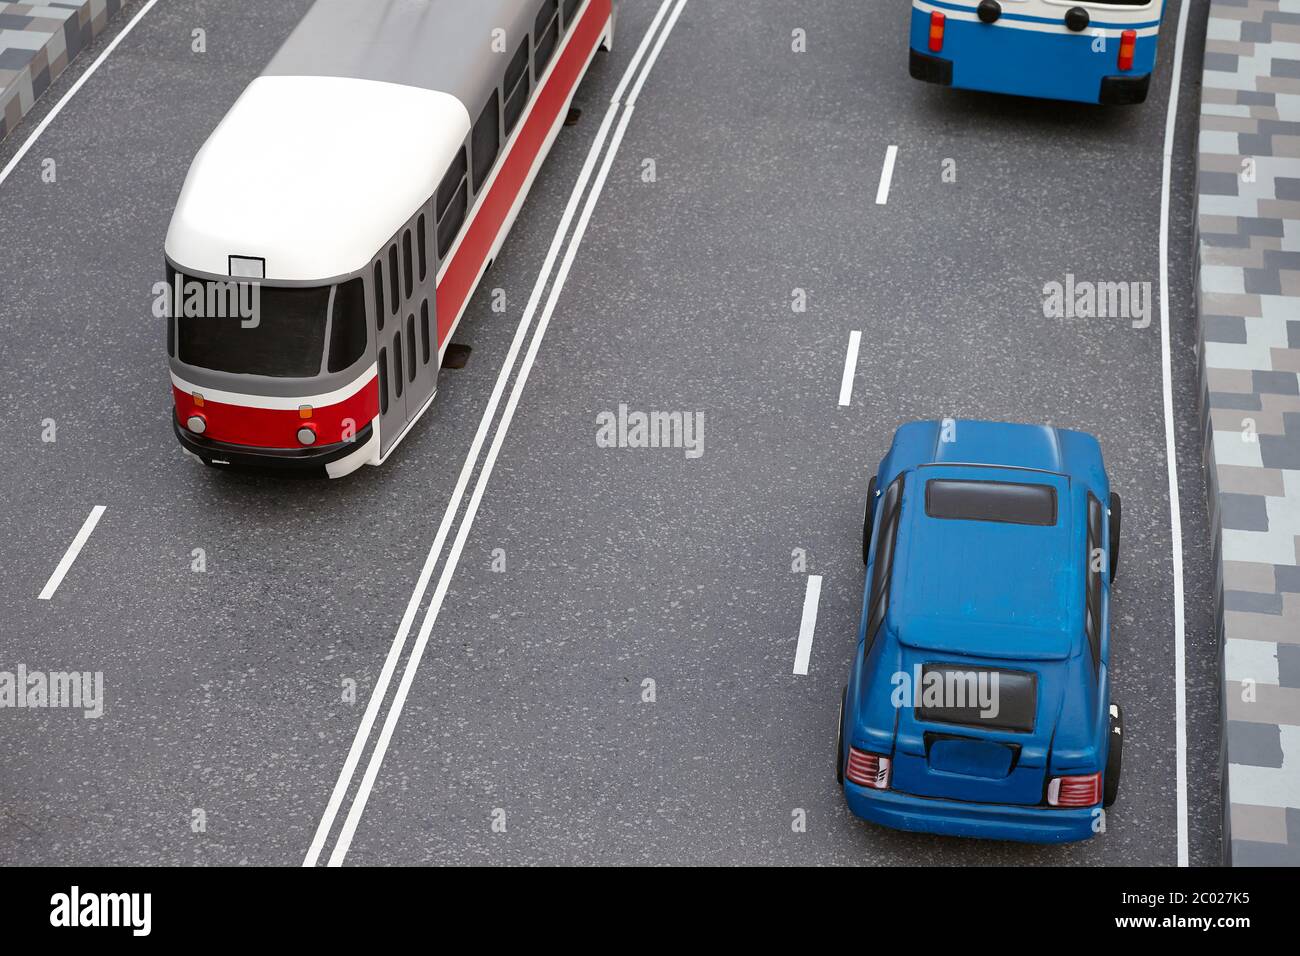 road traffic miniature with toy models of a modern tram, car and trolley bus Stock Photo